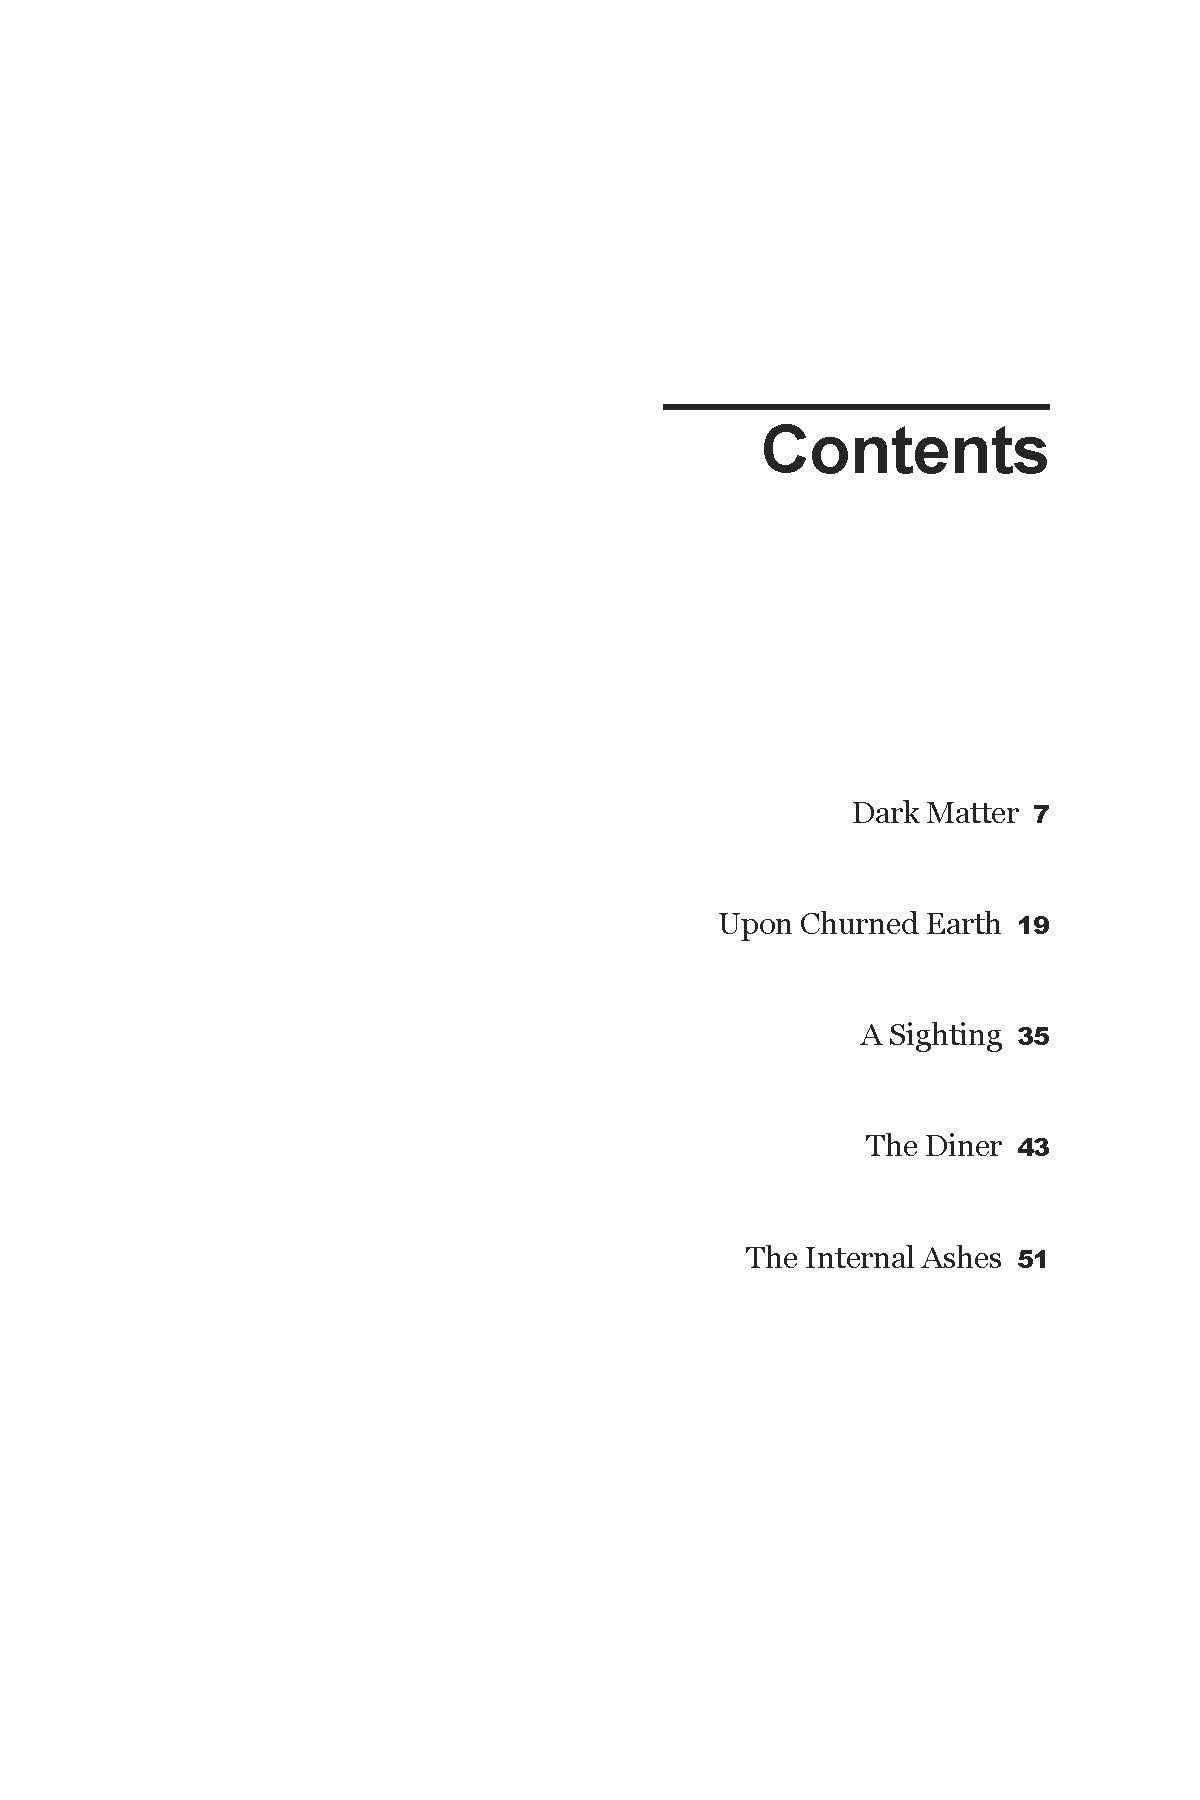 The Internal Ashes contents page